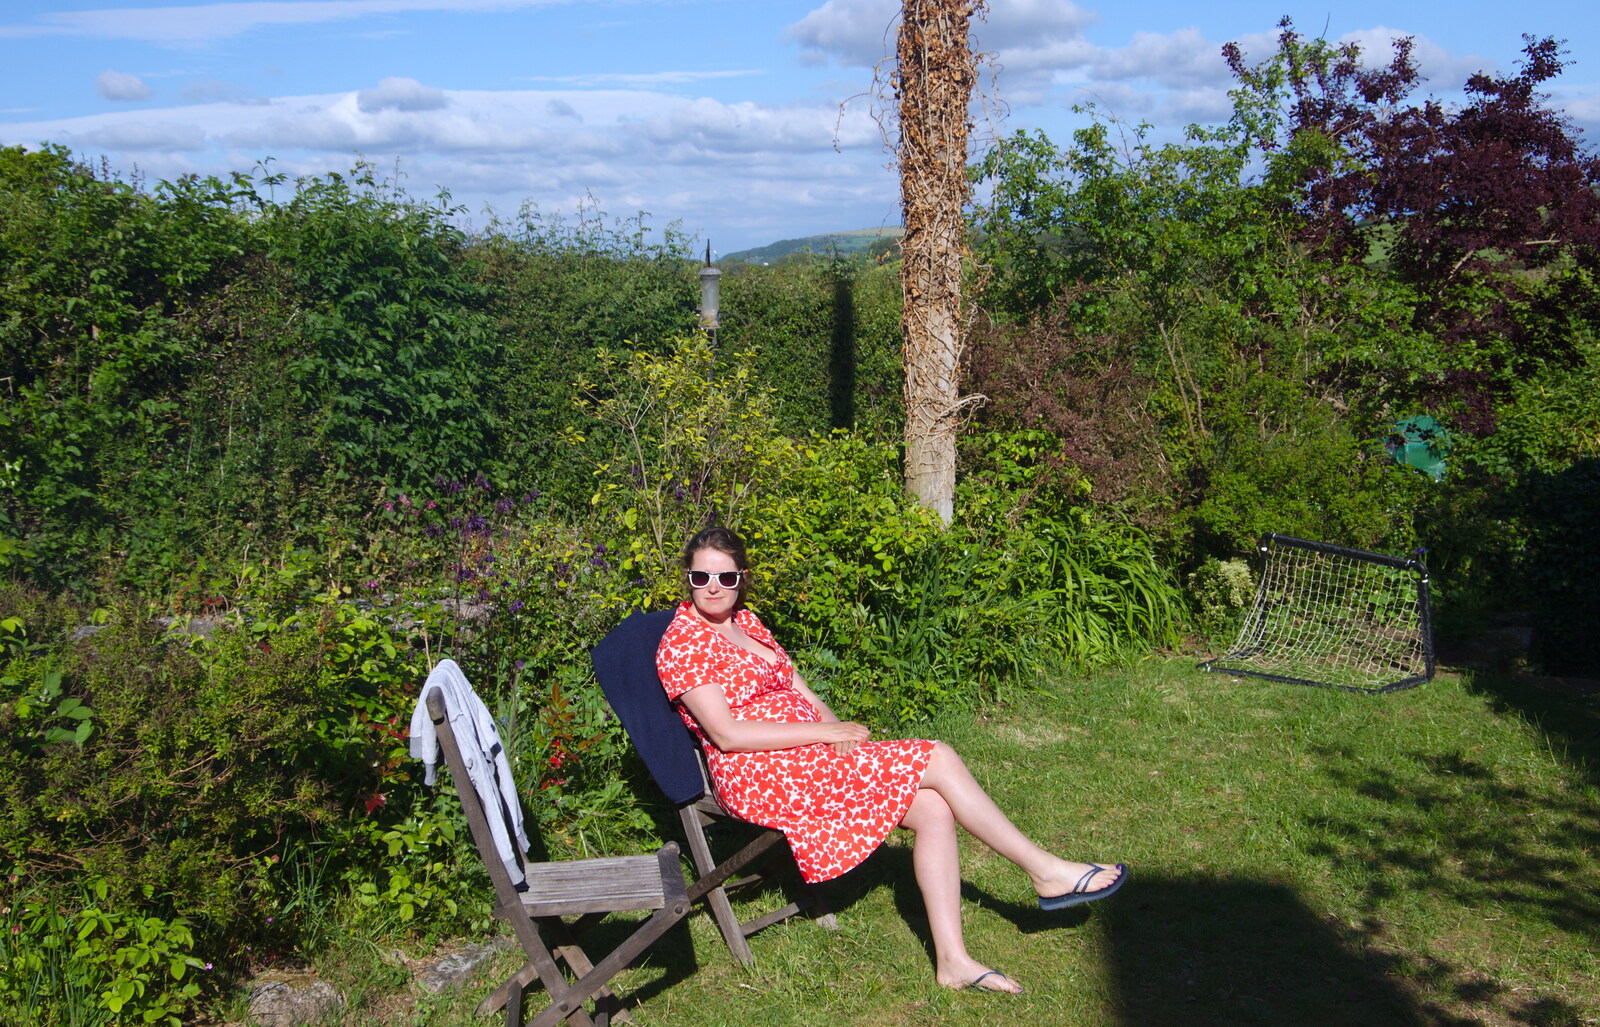 Chagford Lido and a Trip to Parke, Bovey Tracey, Devon - 25th May 2019: Isobel in Matt and Sis's back garden